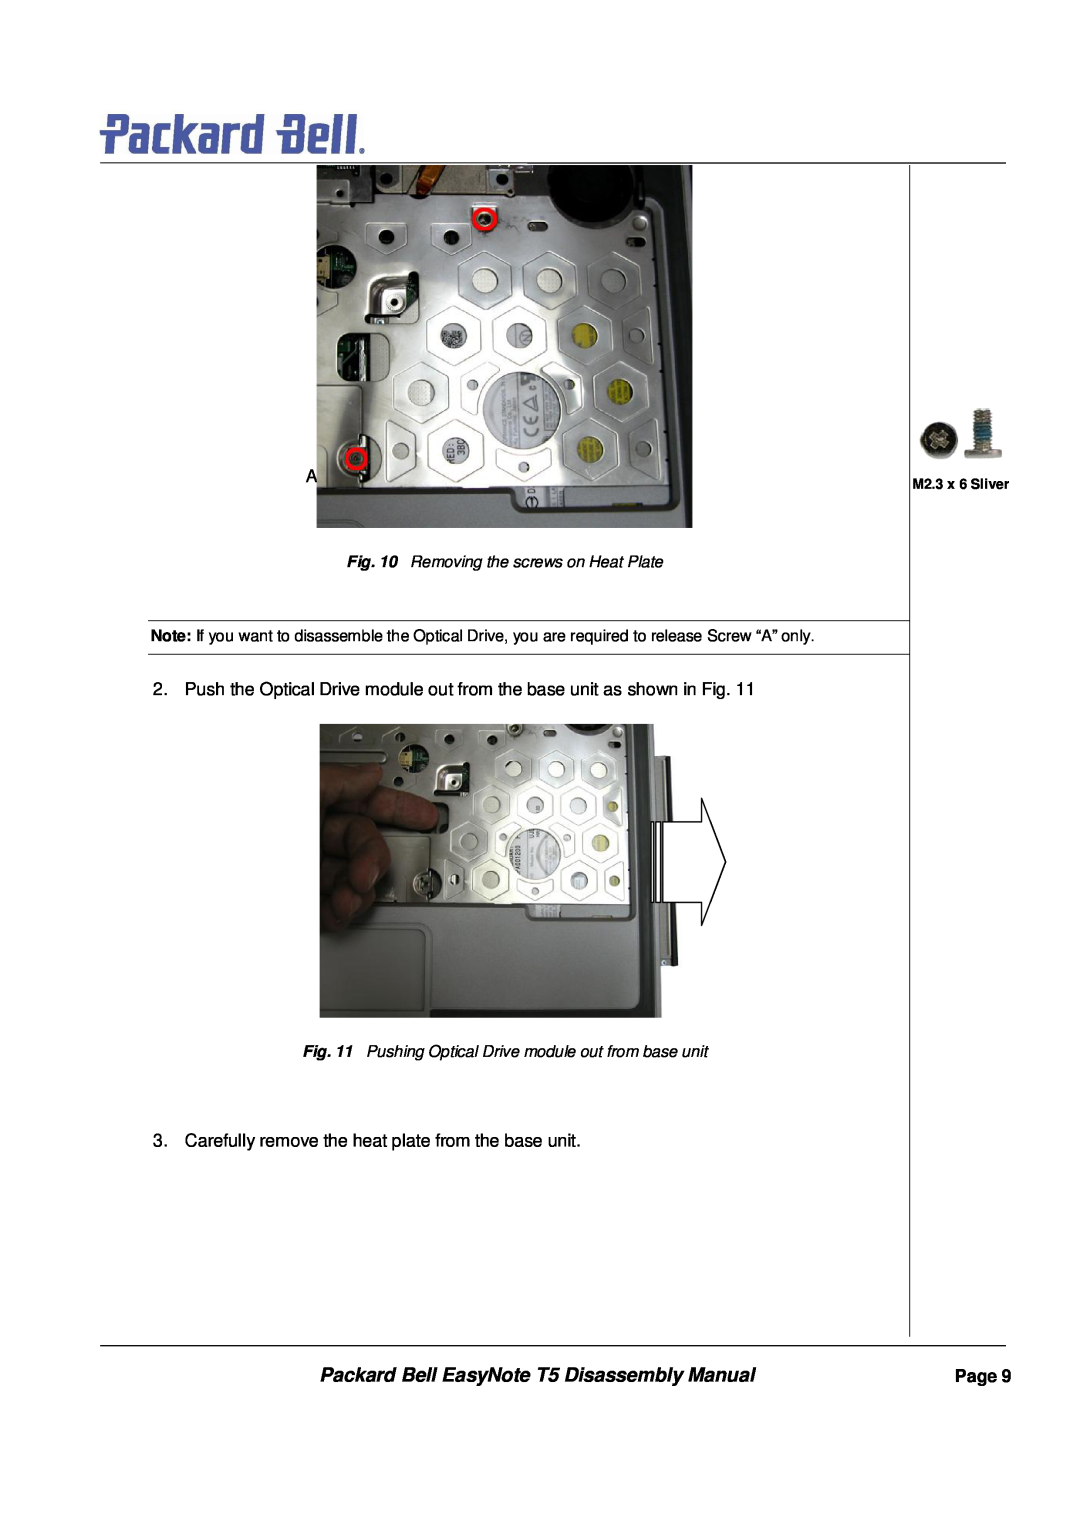 Packard Bell Packard Bell EasyNote T5 Disassembly Manual, Removing the screws on Heat Plate, Page, M2.3 x 6 Sliver 